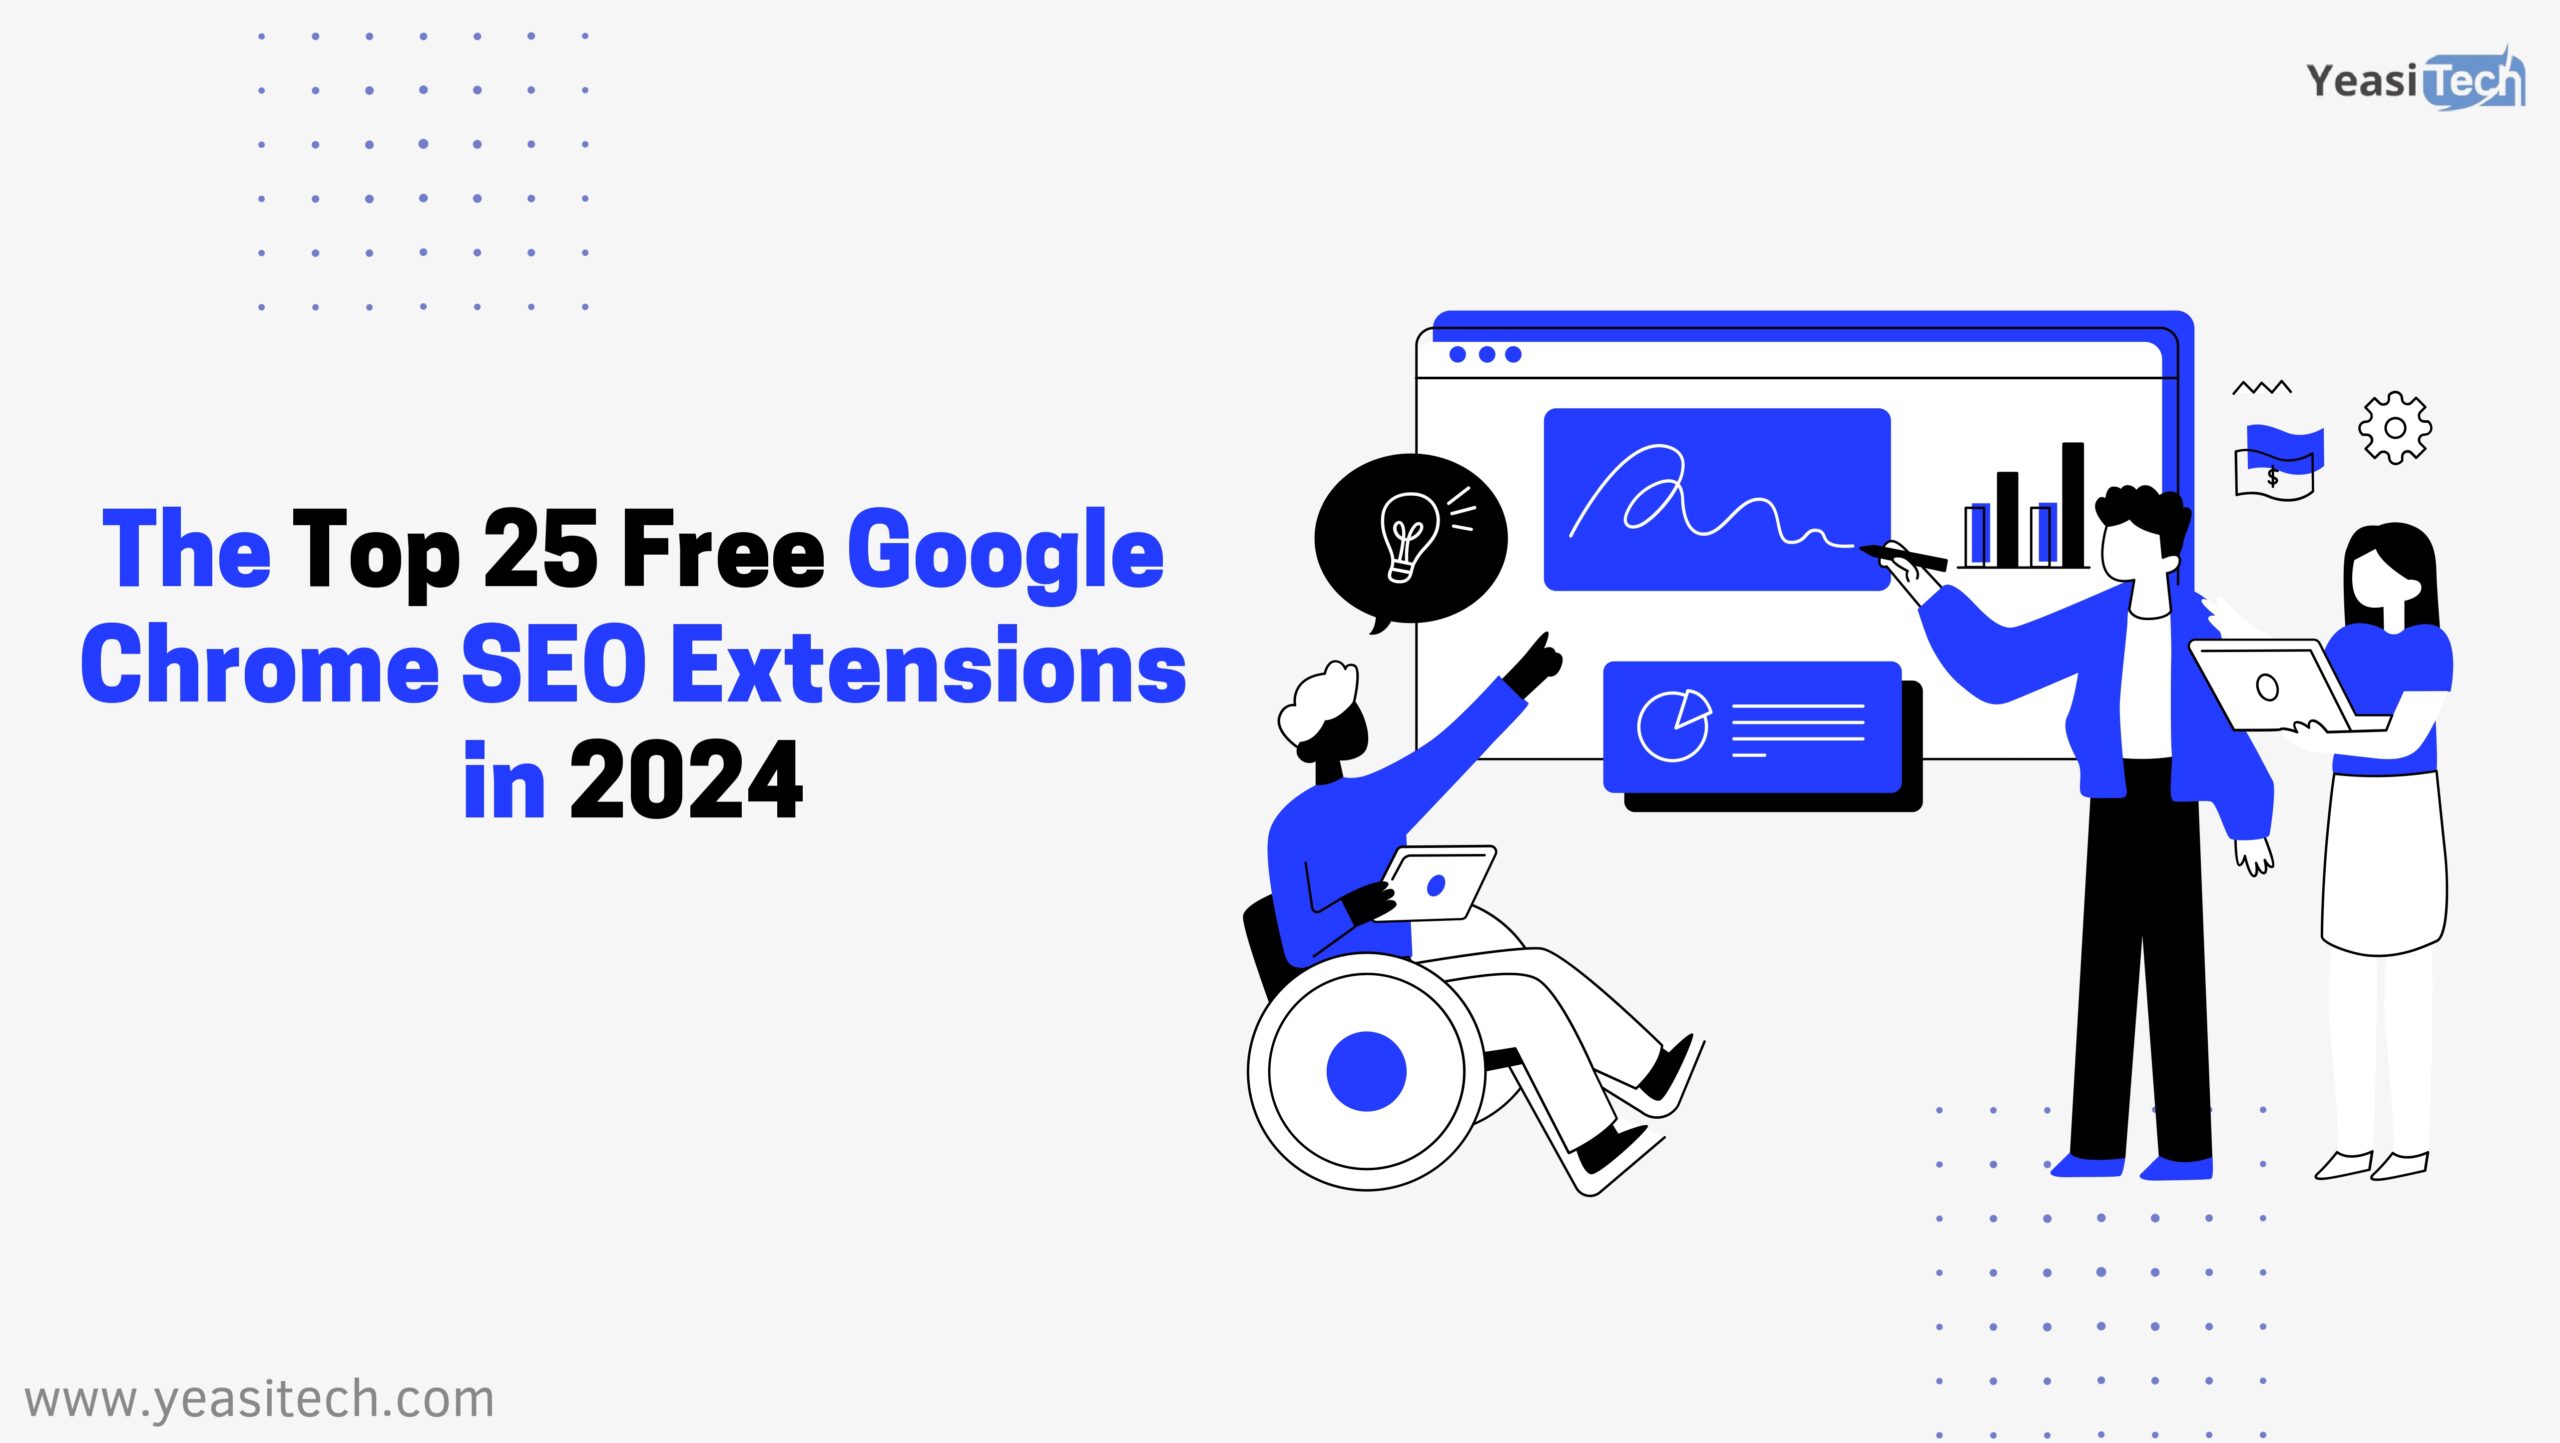 The Top 25 Free Google Chrome SEO Extensions in 2024